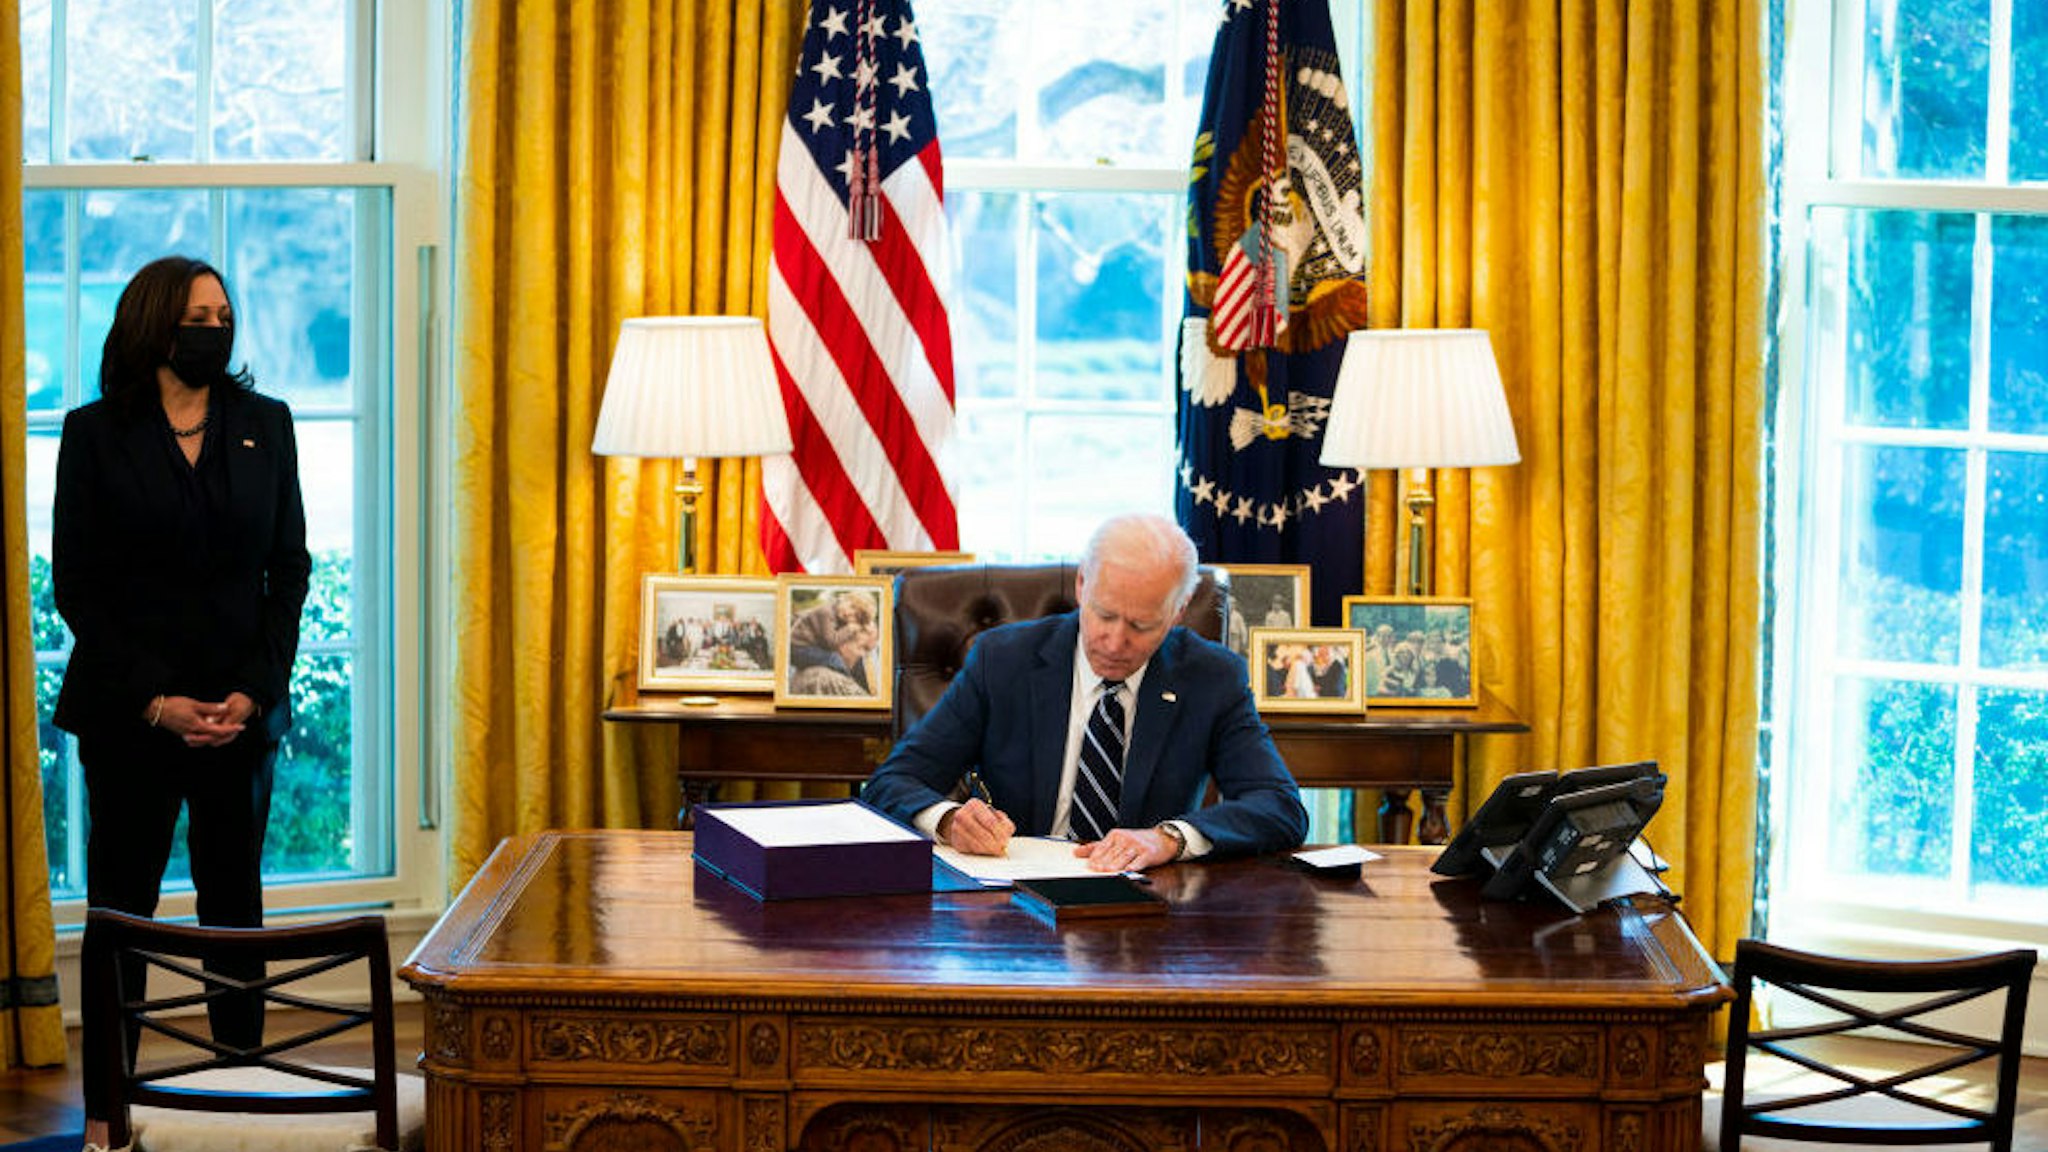 President Joe Biden signs the American Rescue Plan with Vice President Kamala Harris looking on in the Oval Office, Thursday, March, 11, 2021.